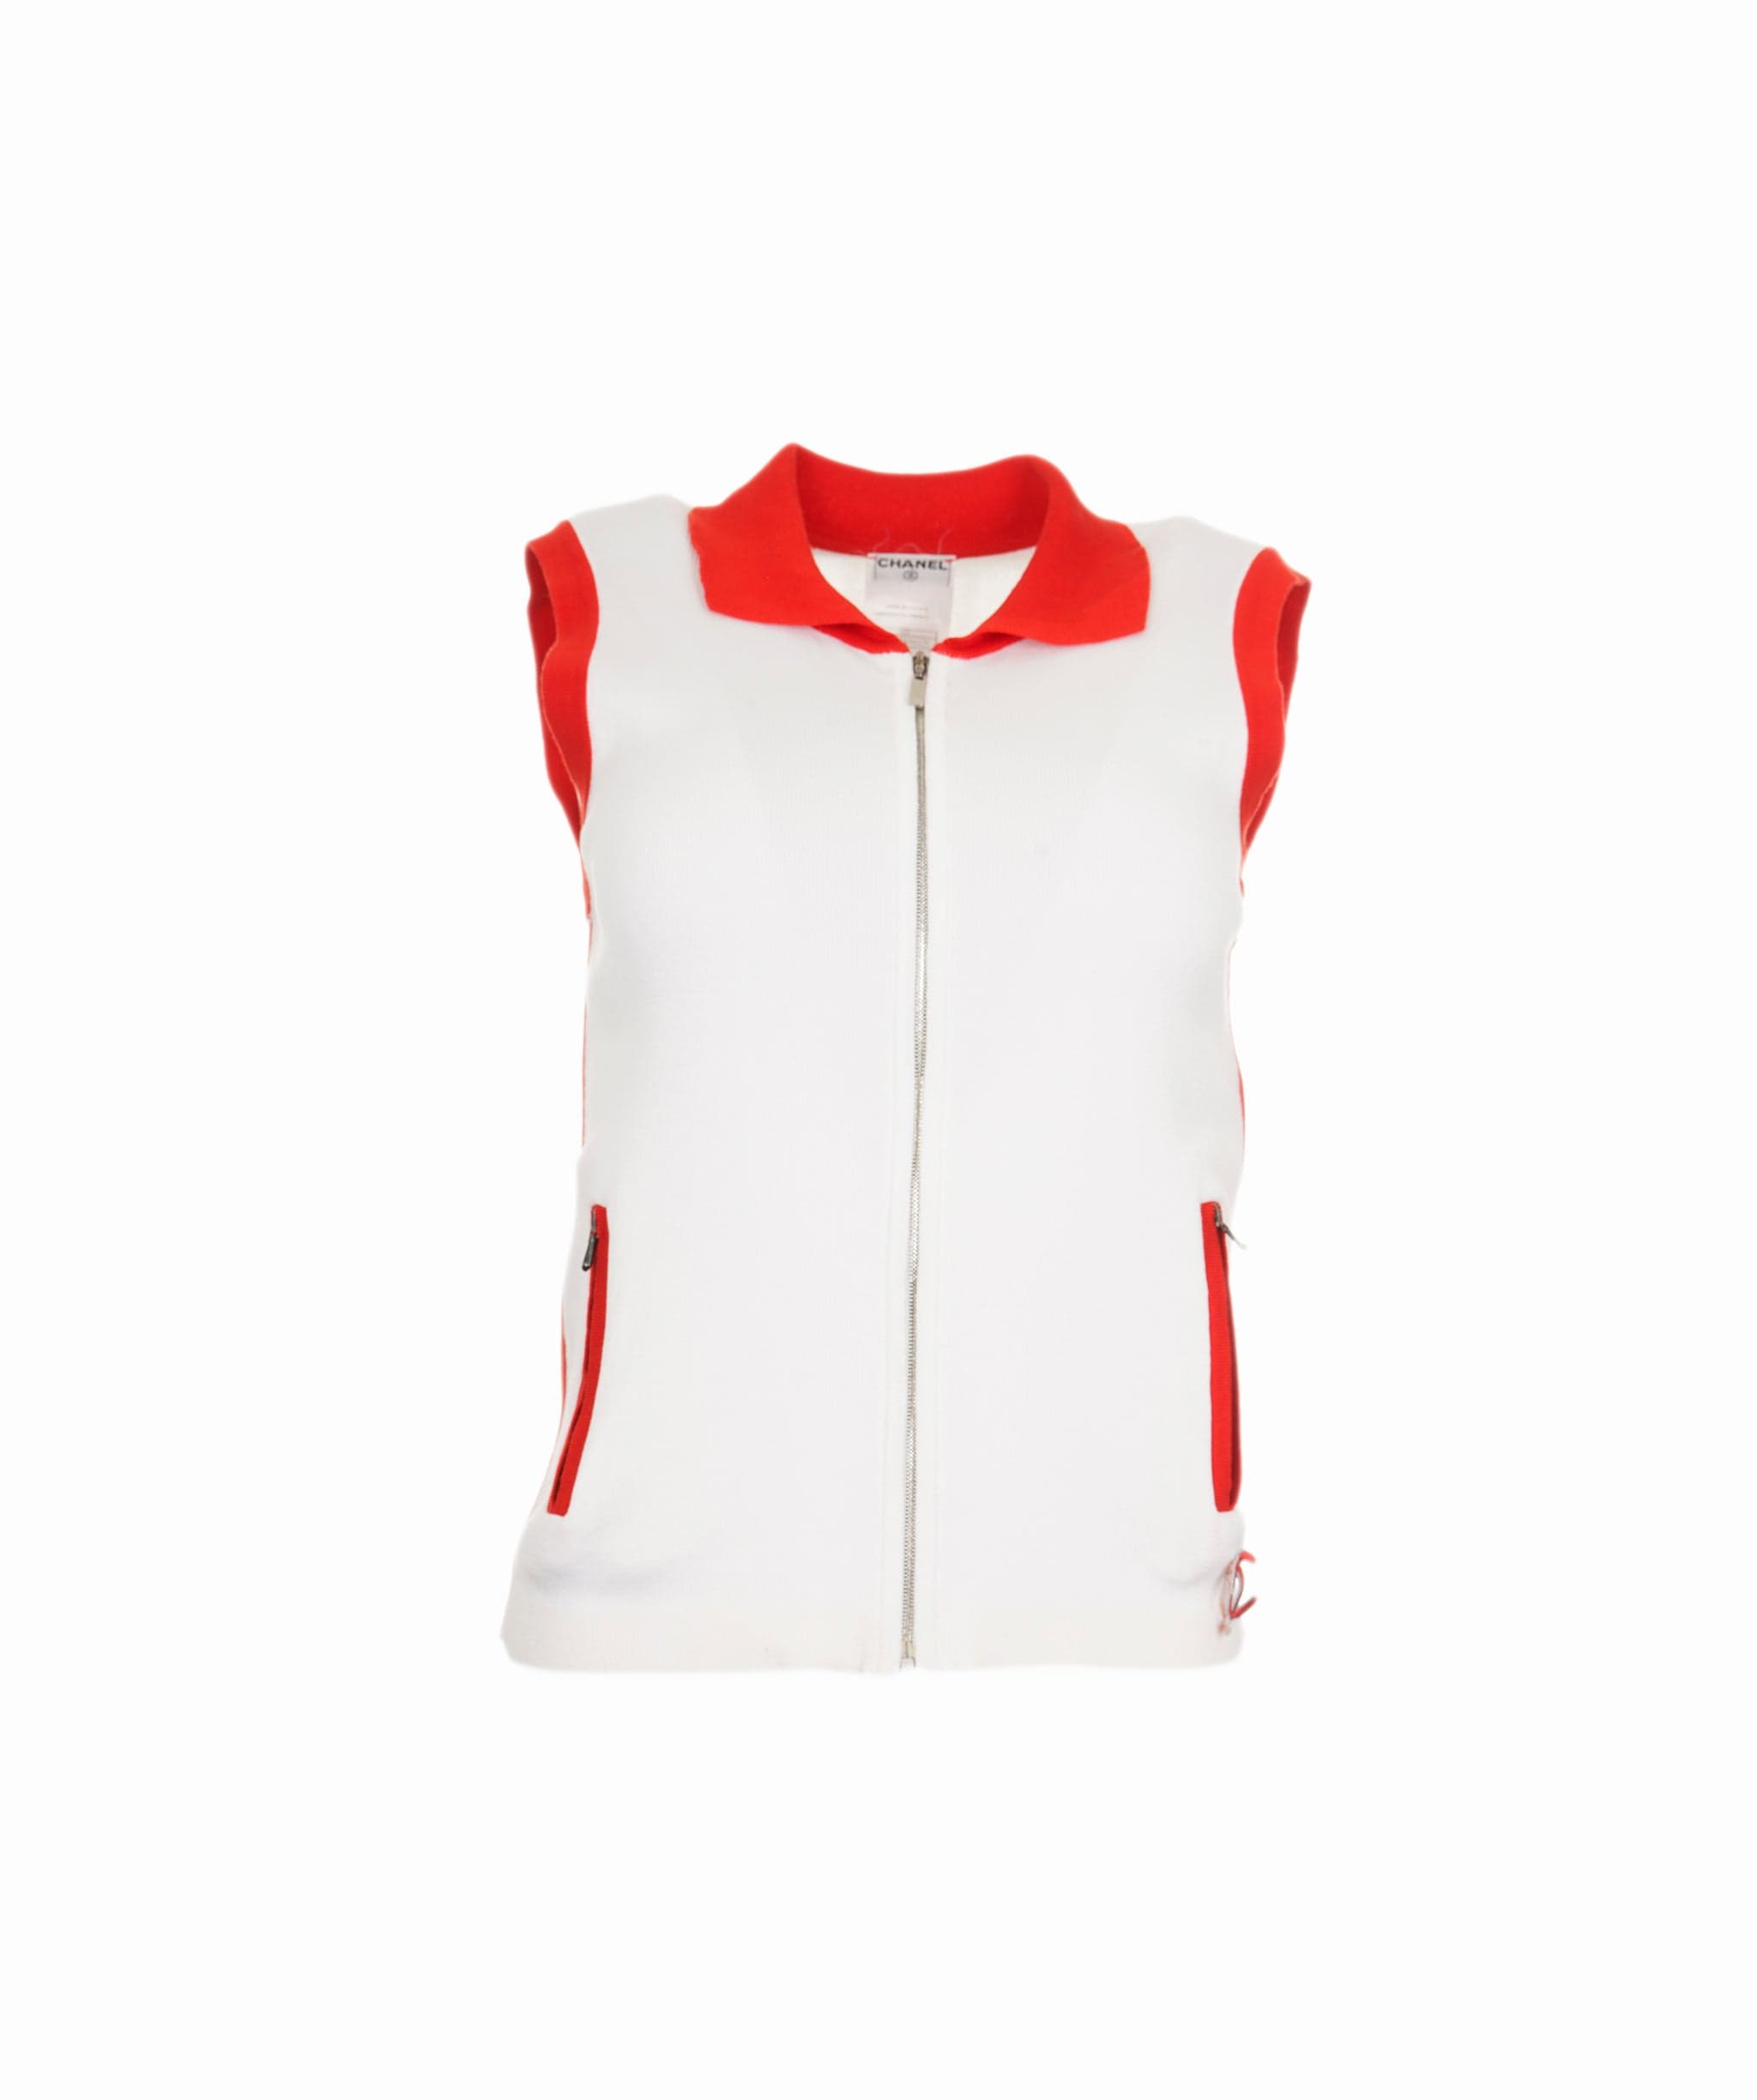 Chanel Chanel 02S Full Zip Knit Top White Red ASL4873